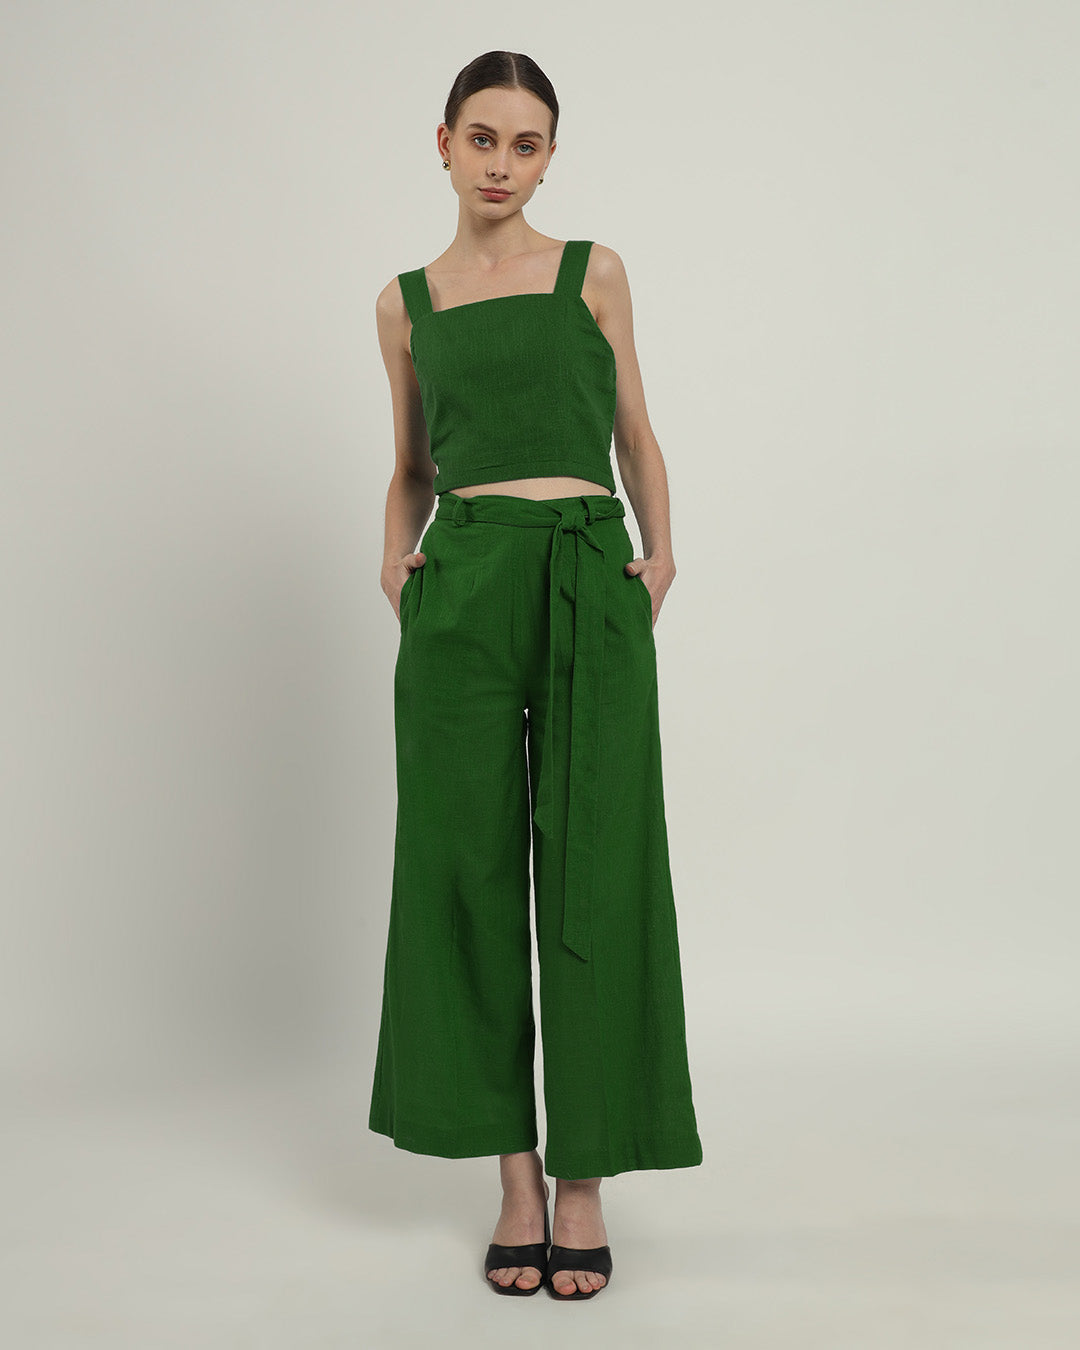 Sleek Square Crop Solid Emerald Top (Without Bottoms)